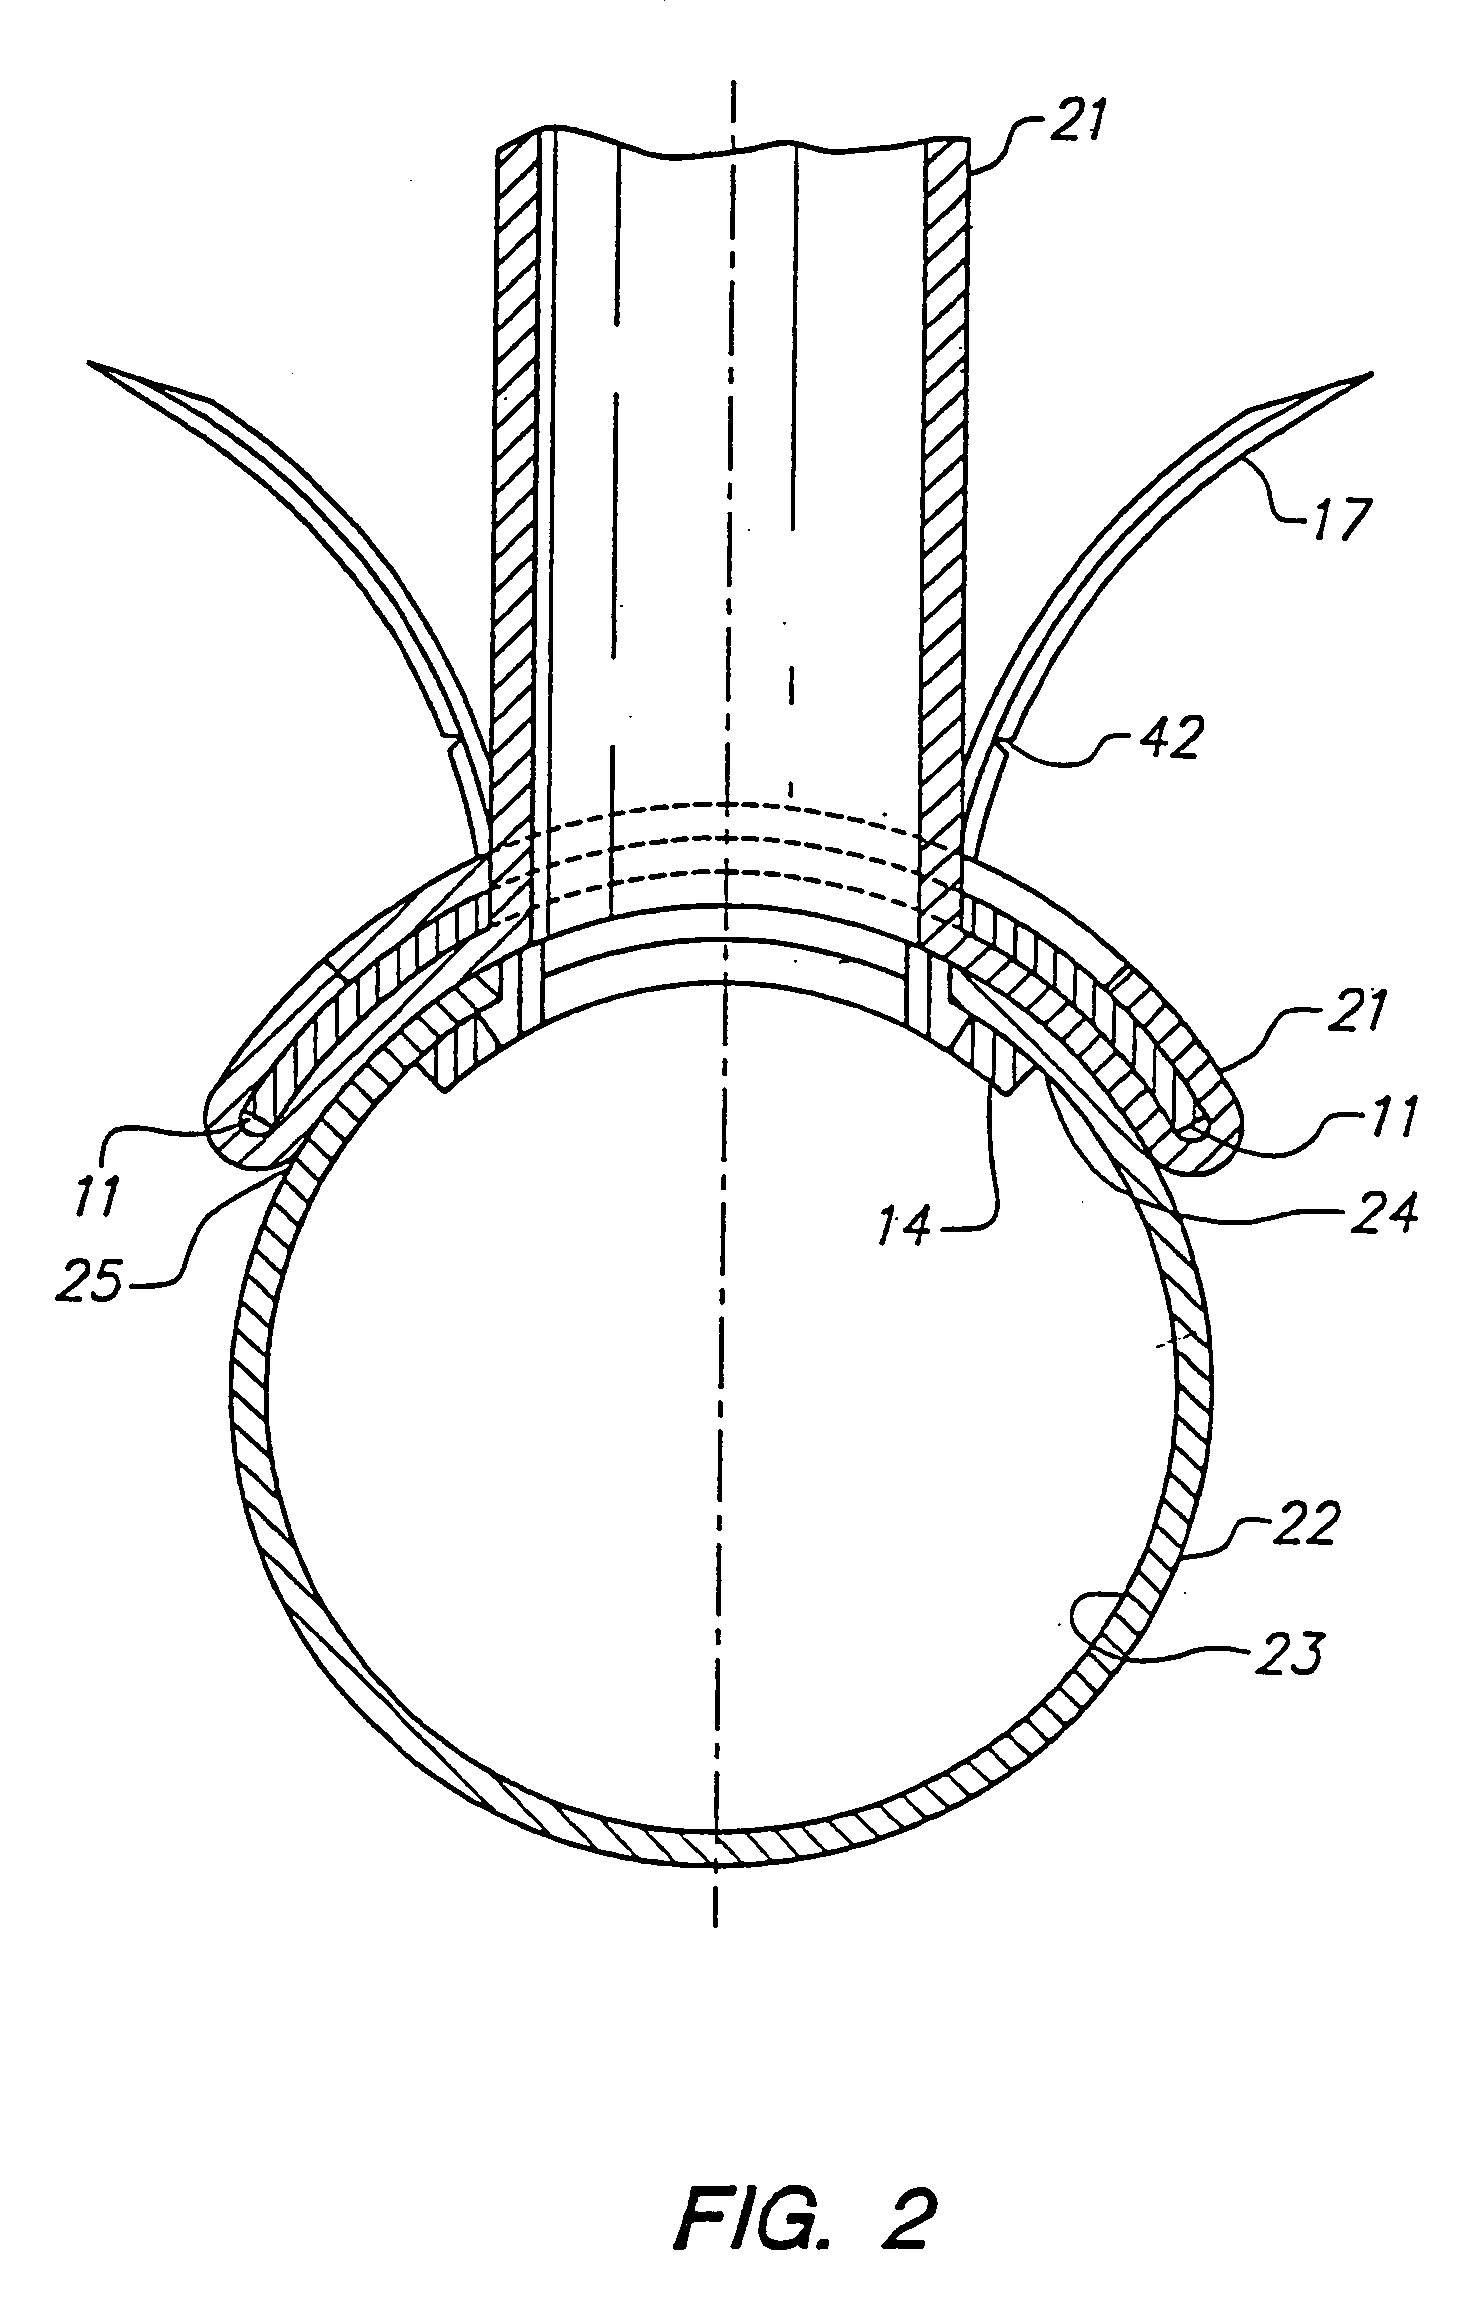 Anastomosis device having at least one frangible member